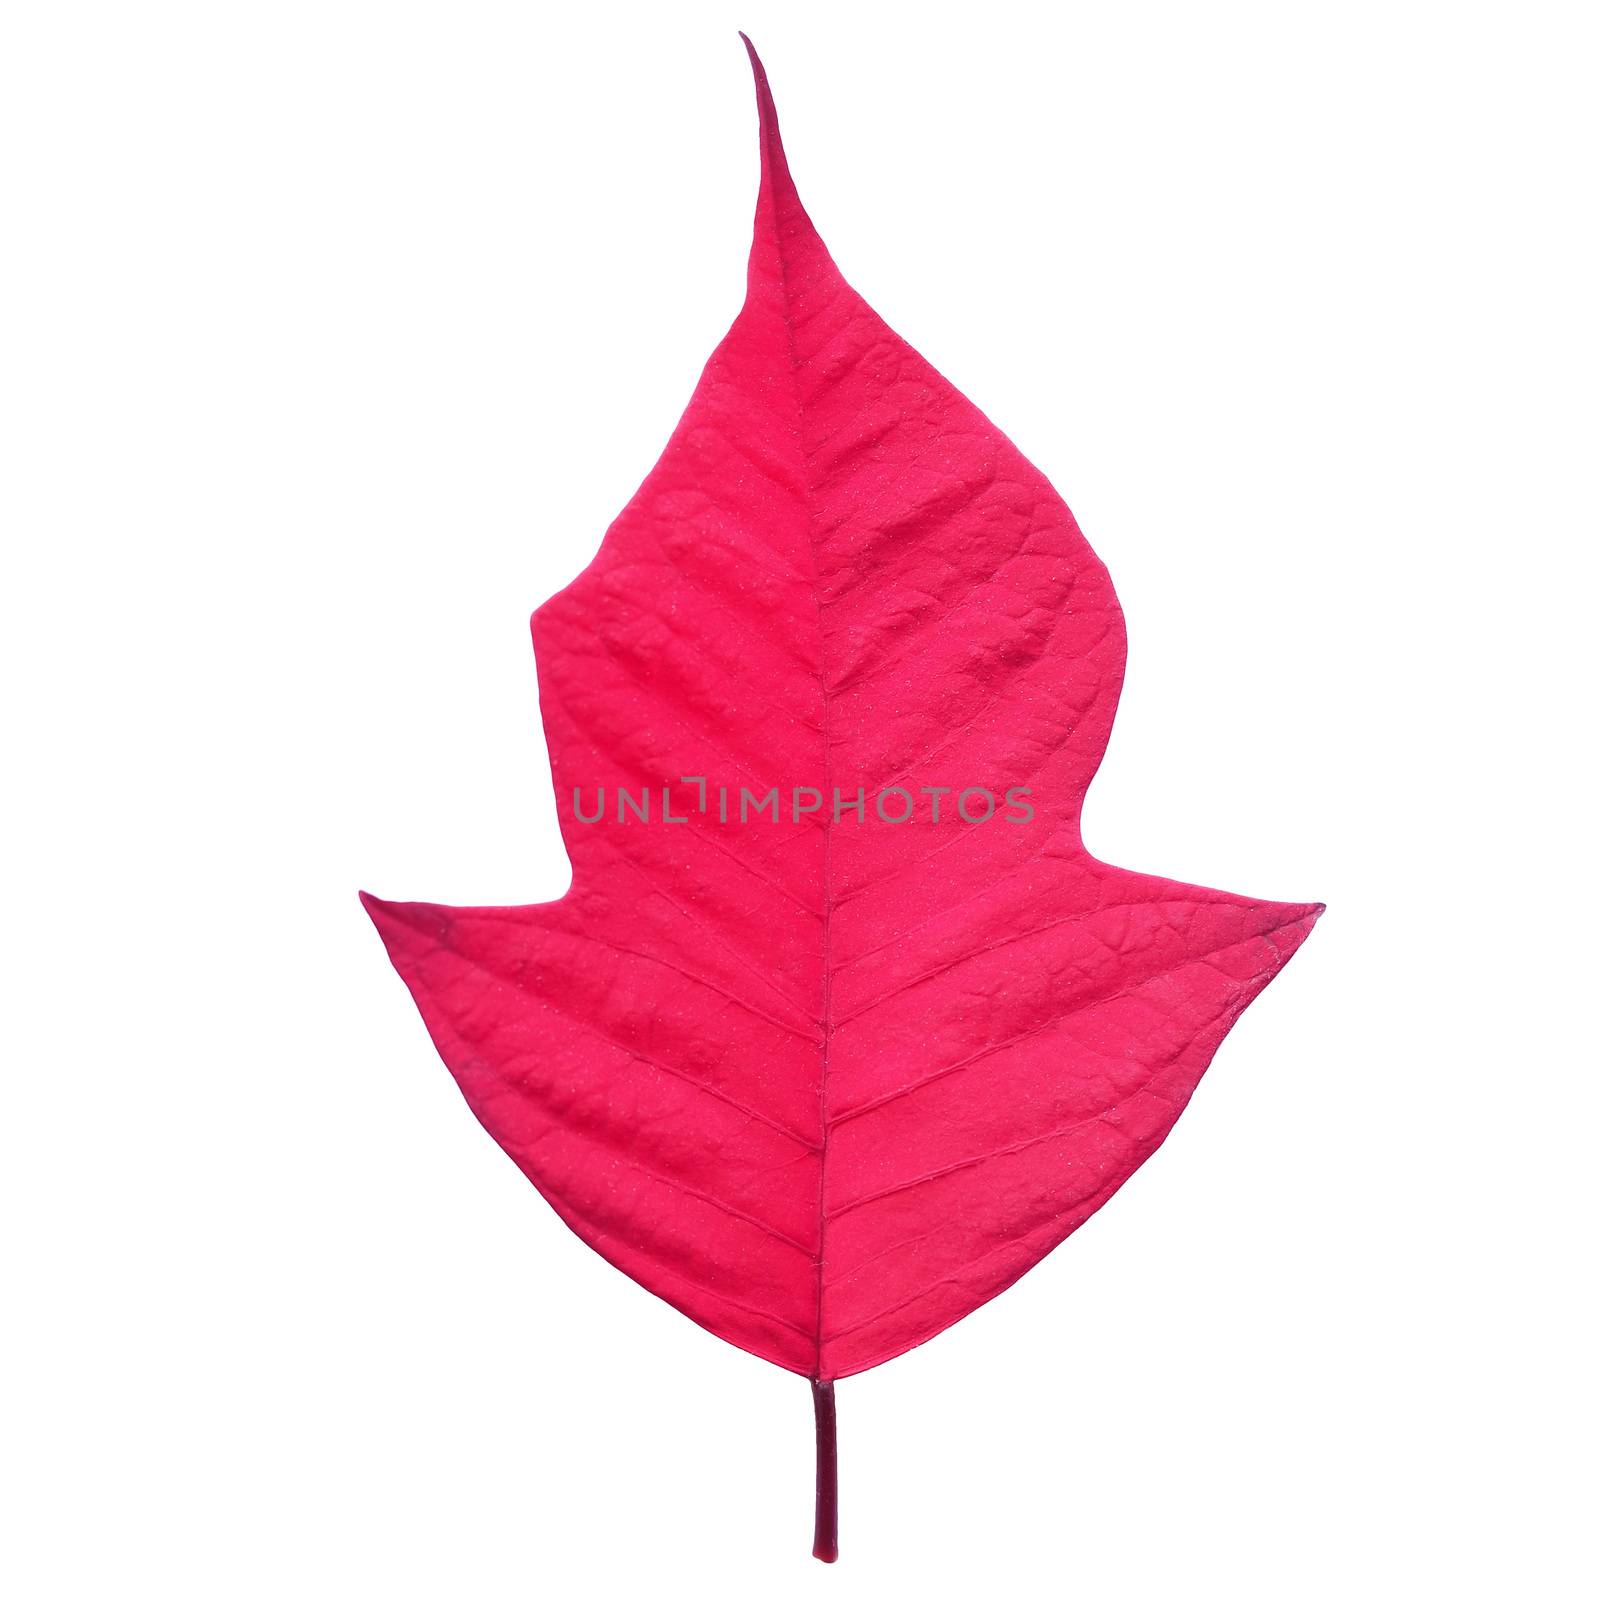 Red leaf of Christmas star Poinsettia Euphorbia pulcherrima flower isolated over white